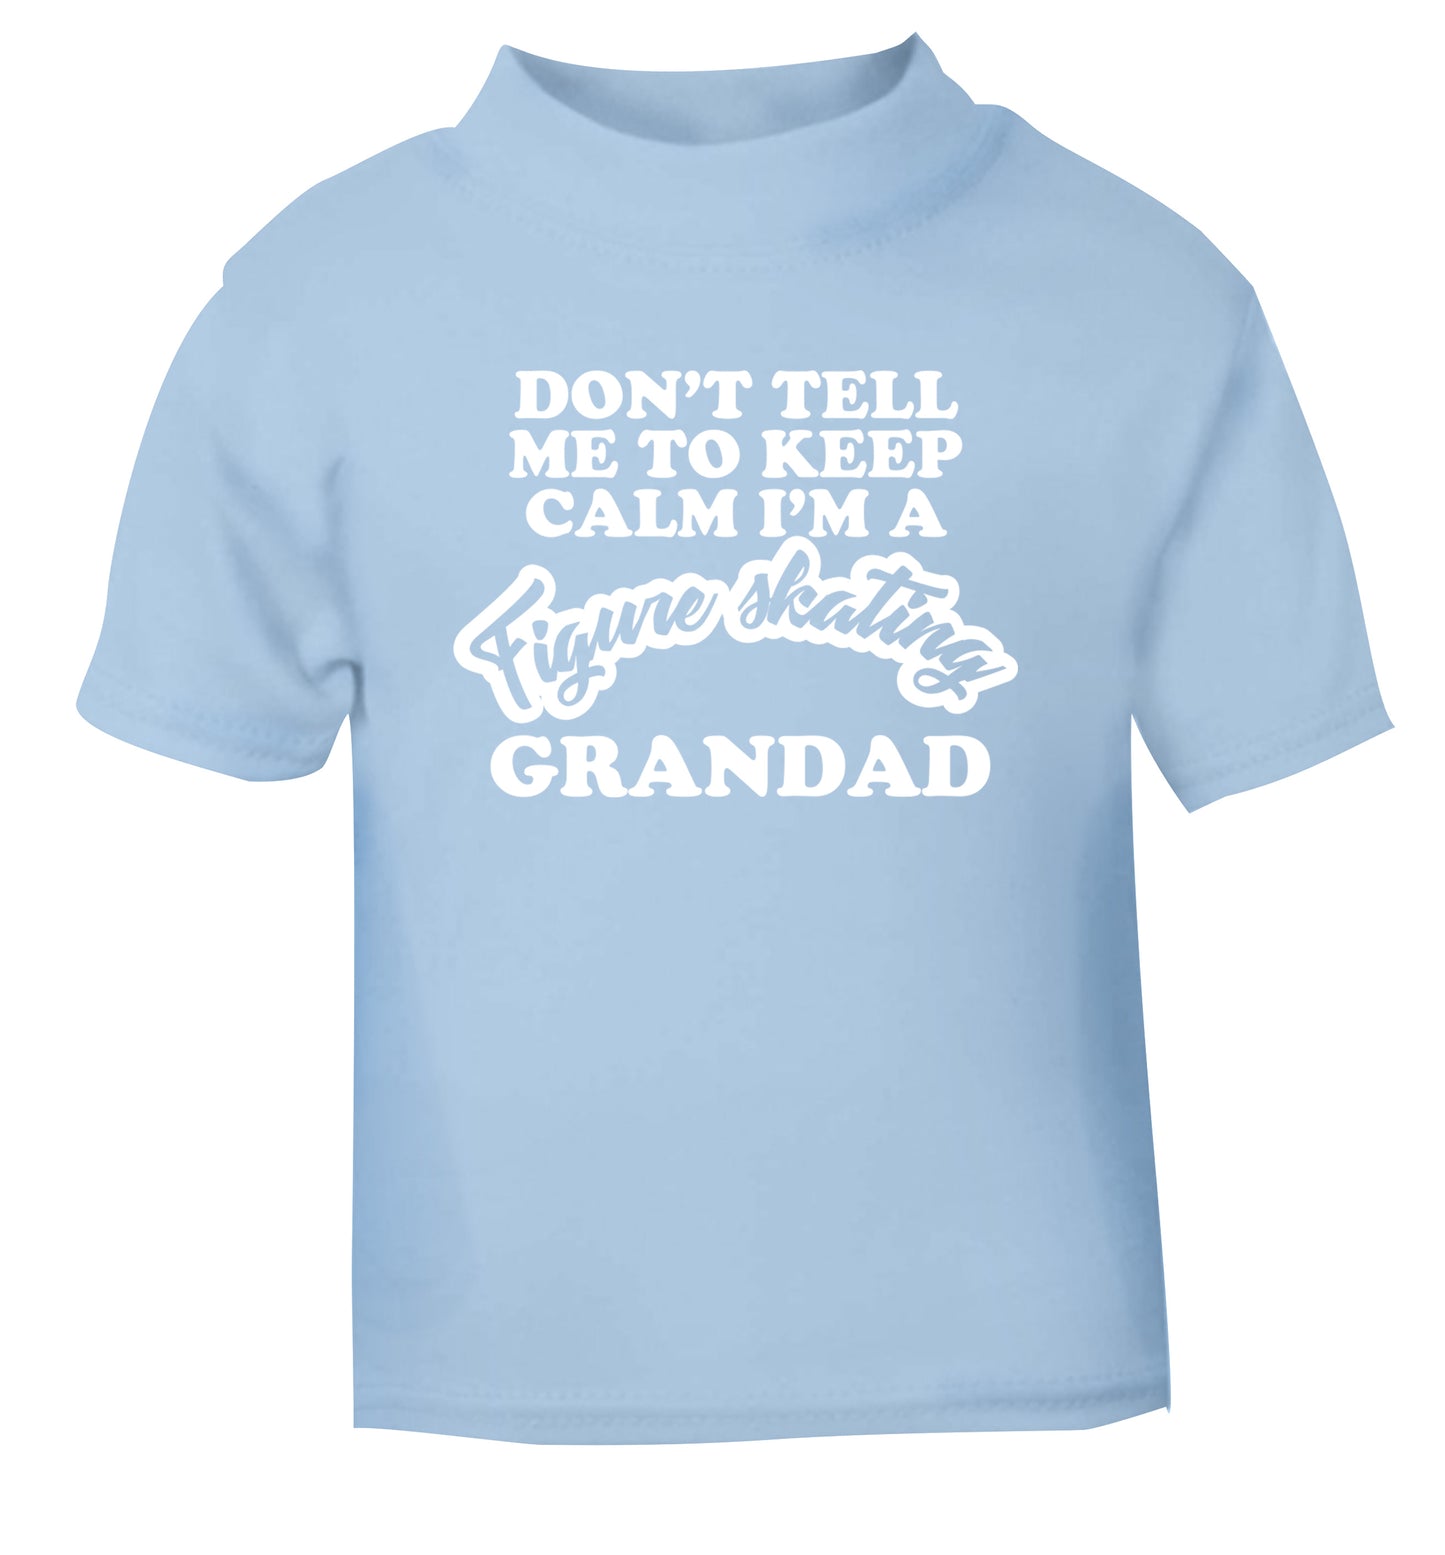 Don't tell me to keep calm I'm a figure skating grandad light blue Baby Toddler Tshirt 2 Years